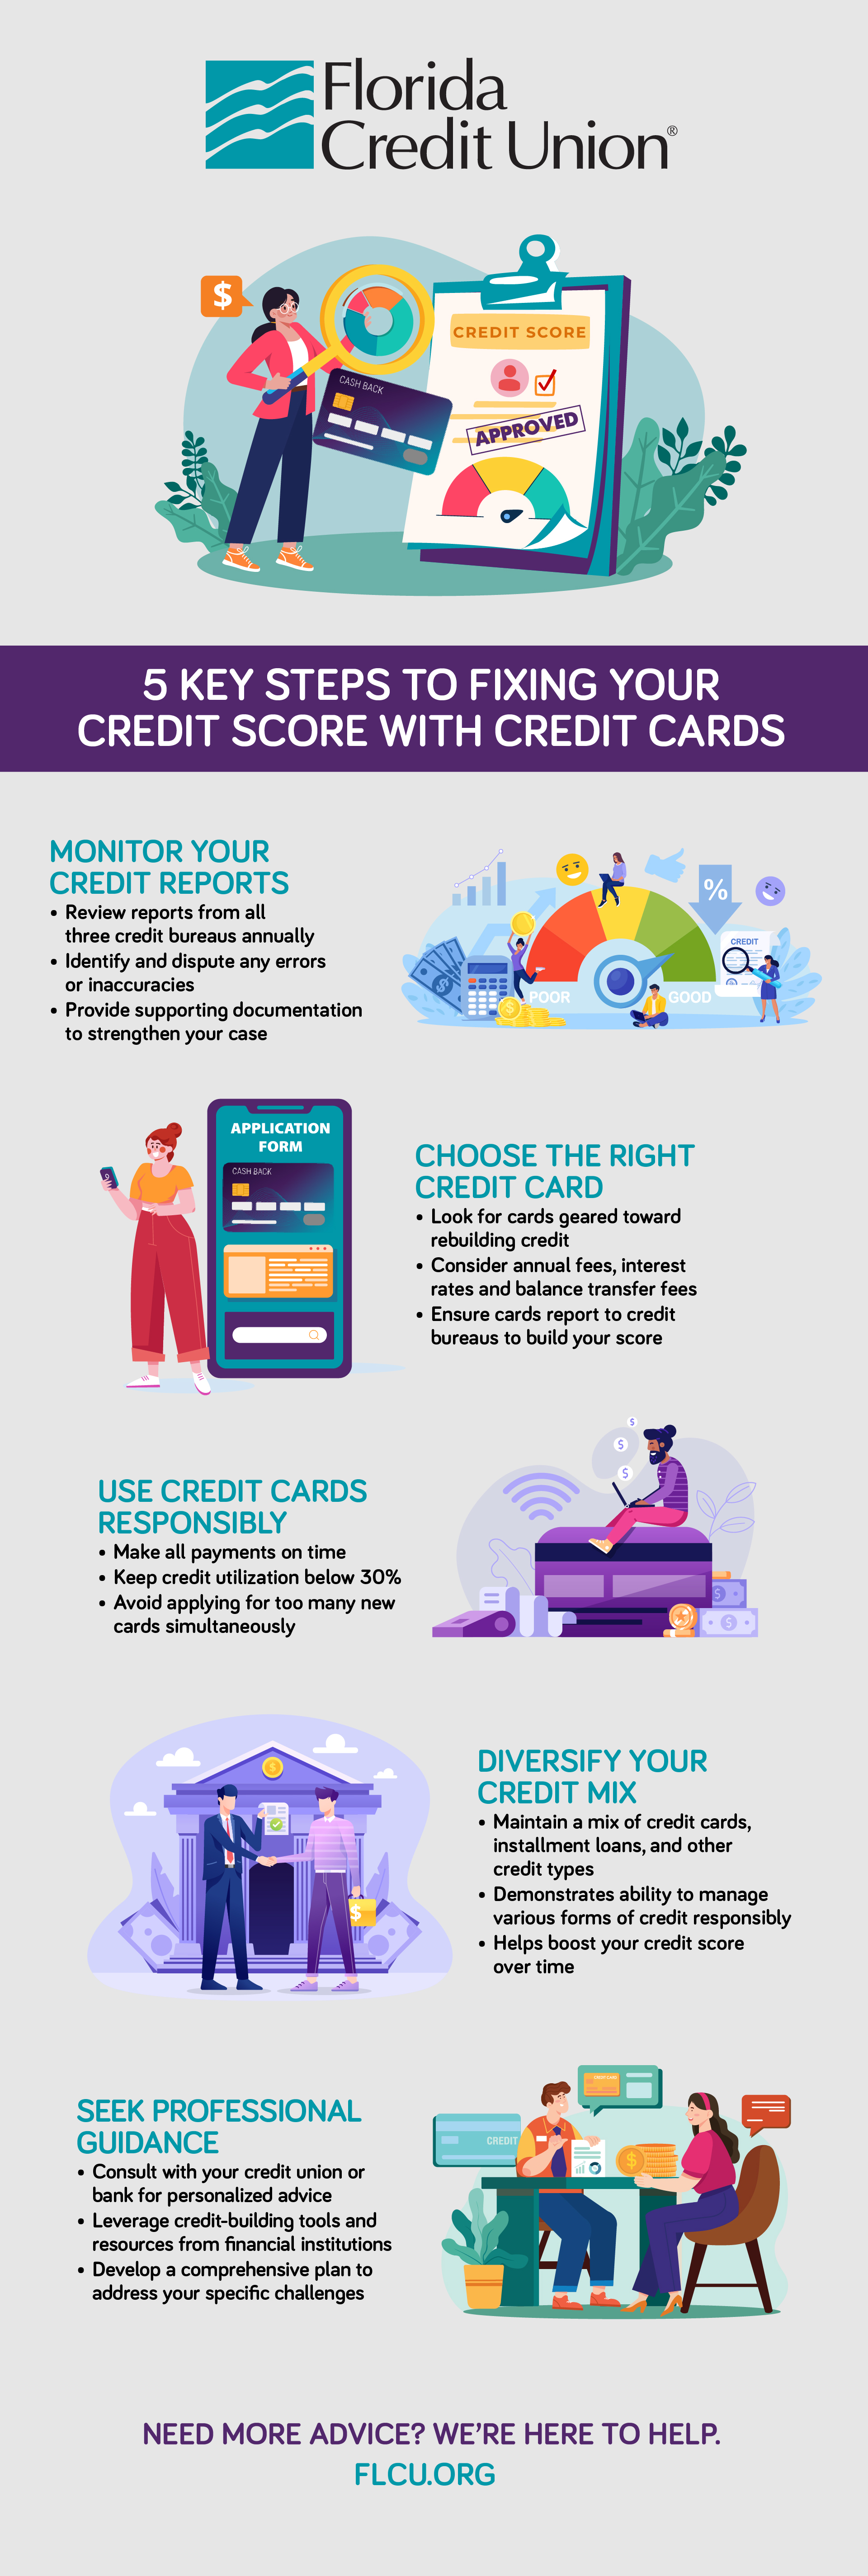 24_FLCU_0041_Fixing-Your-Credit-Score-Infographic-R3V1.jpg